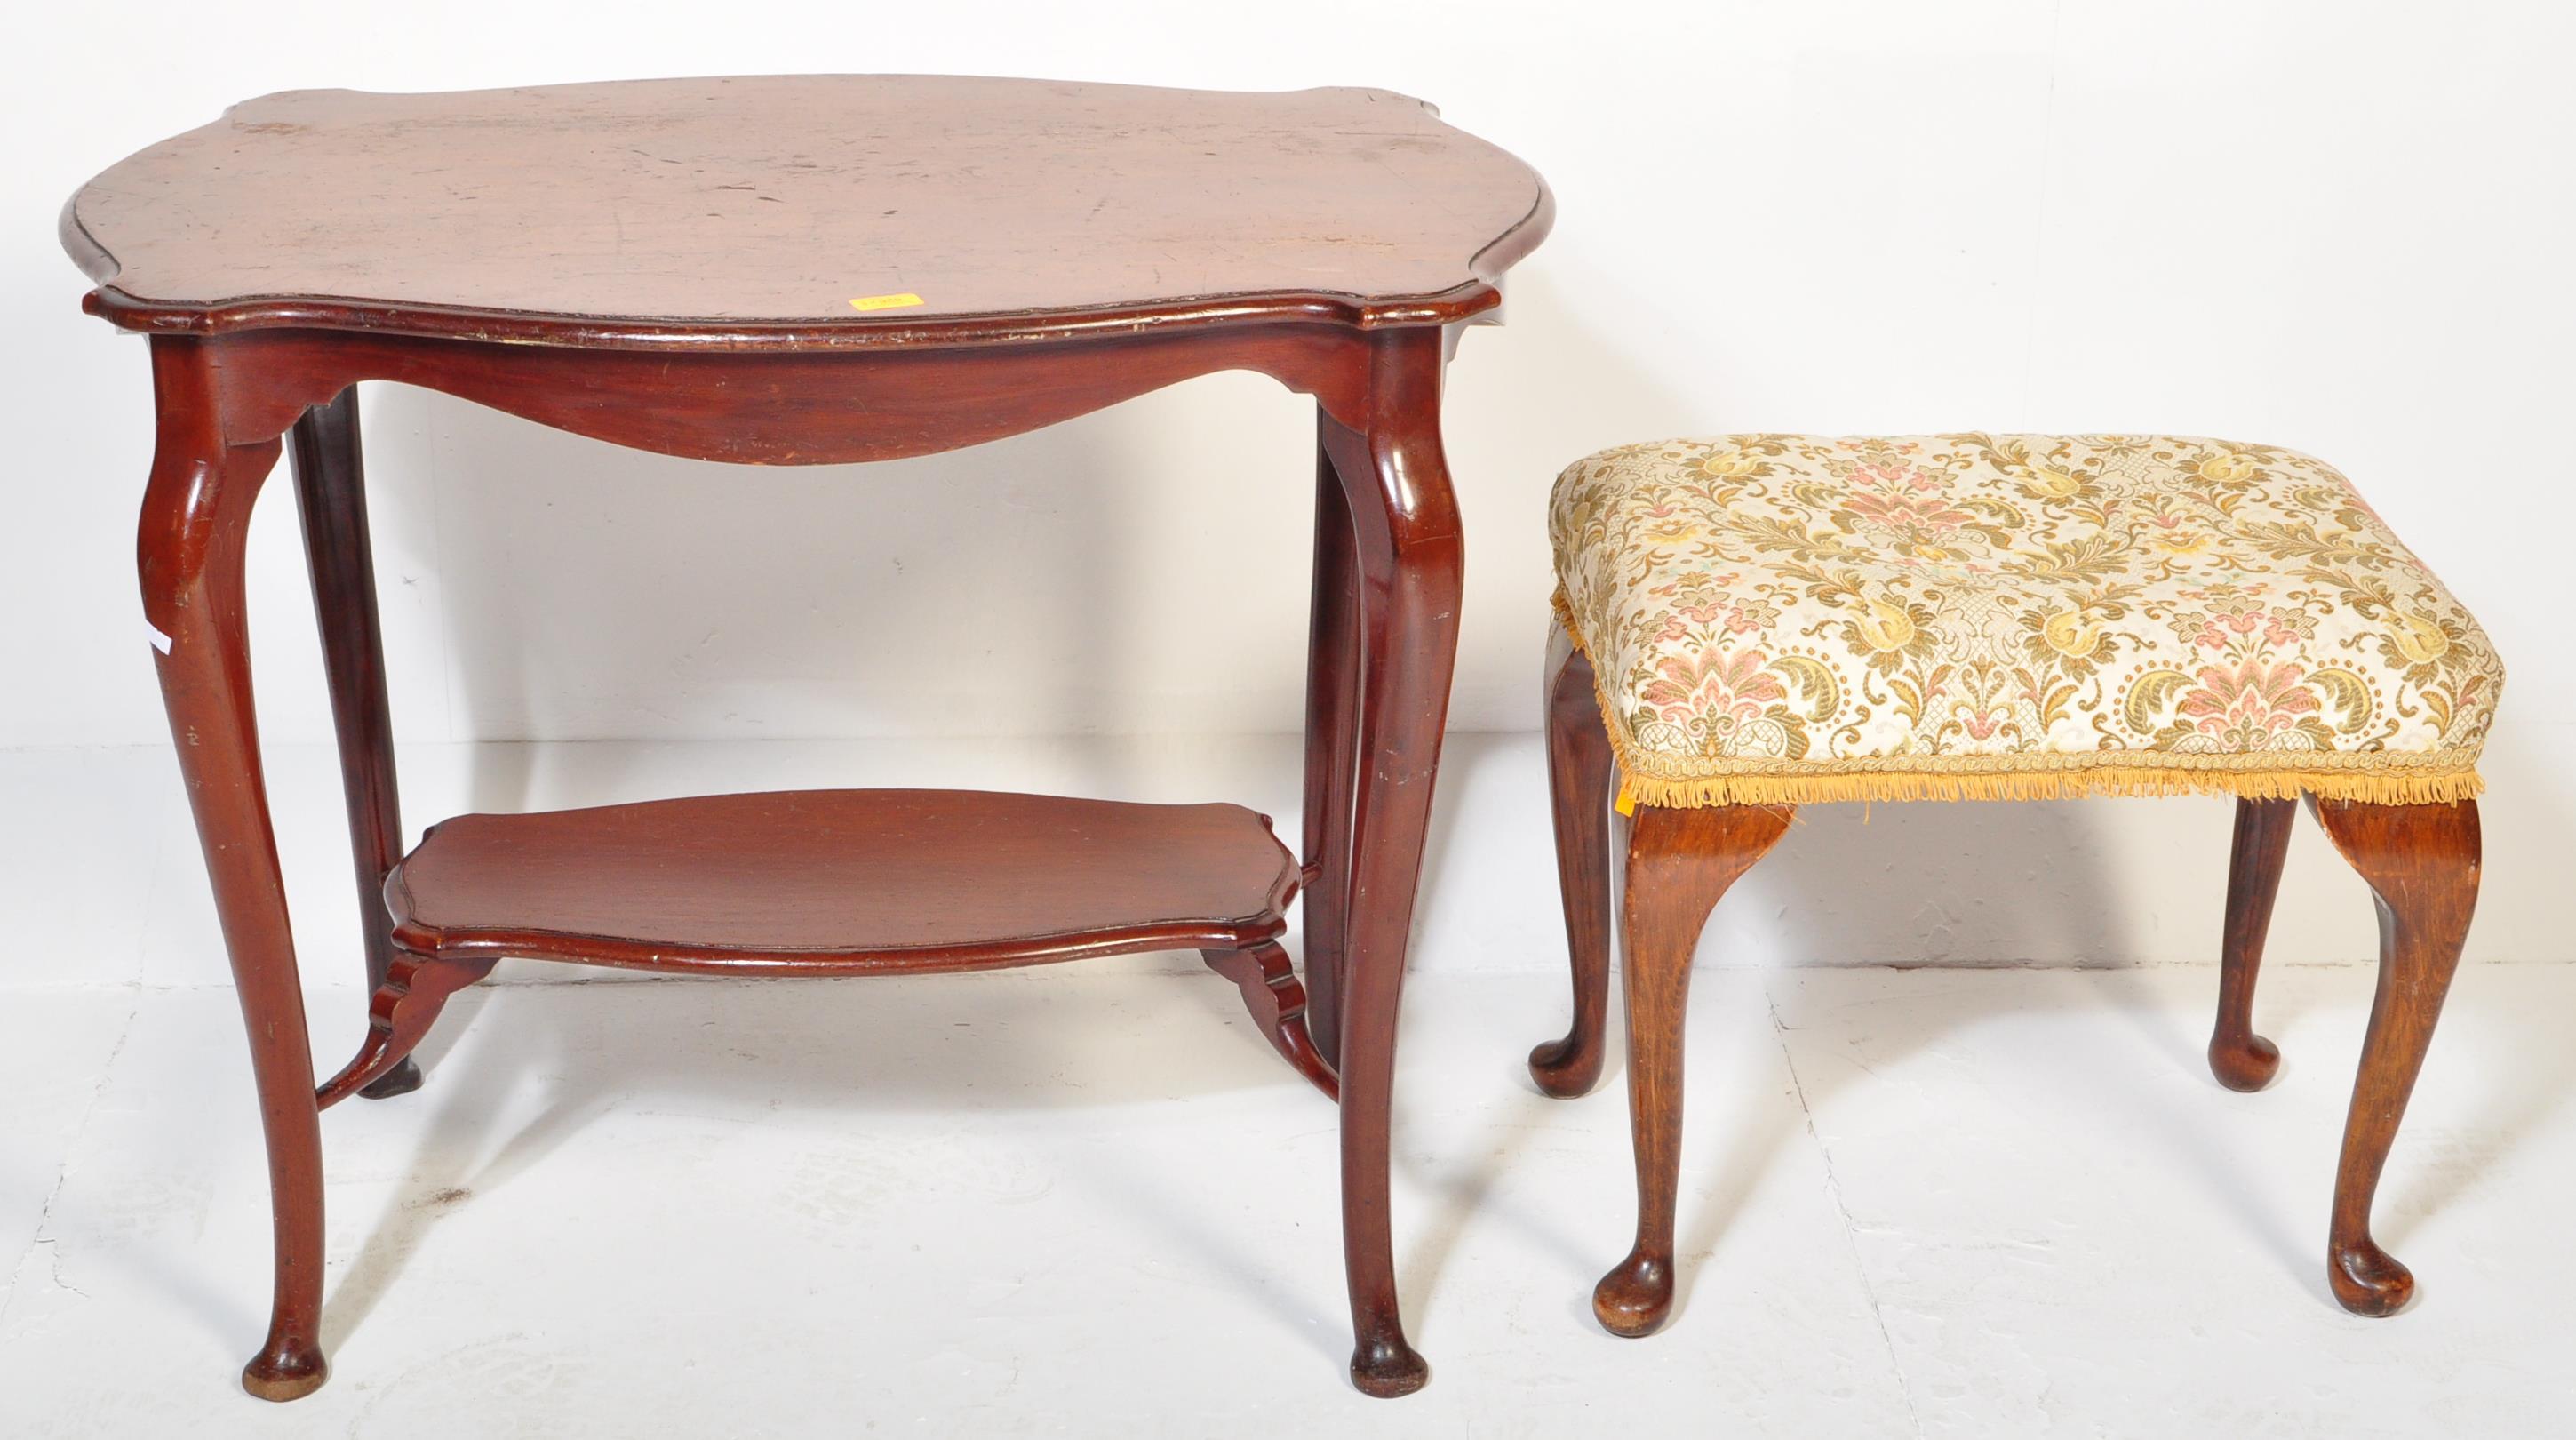 EDWARDIAN INLAID SIDE TABLE & QUEEN ANNE STYLE FOOTSTOOL - Image 2 of 5